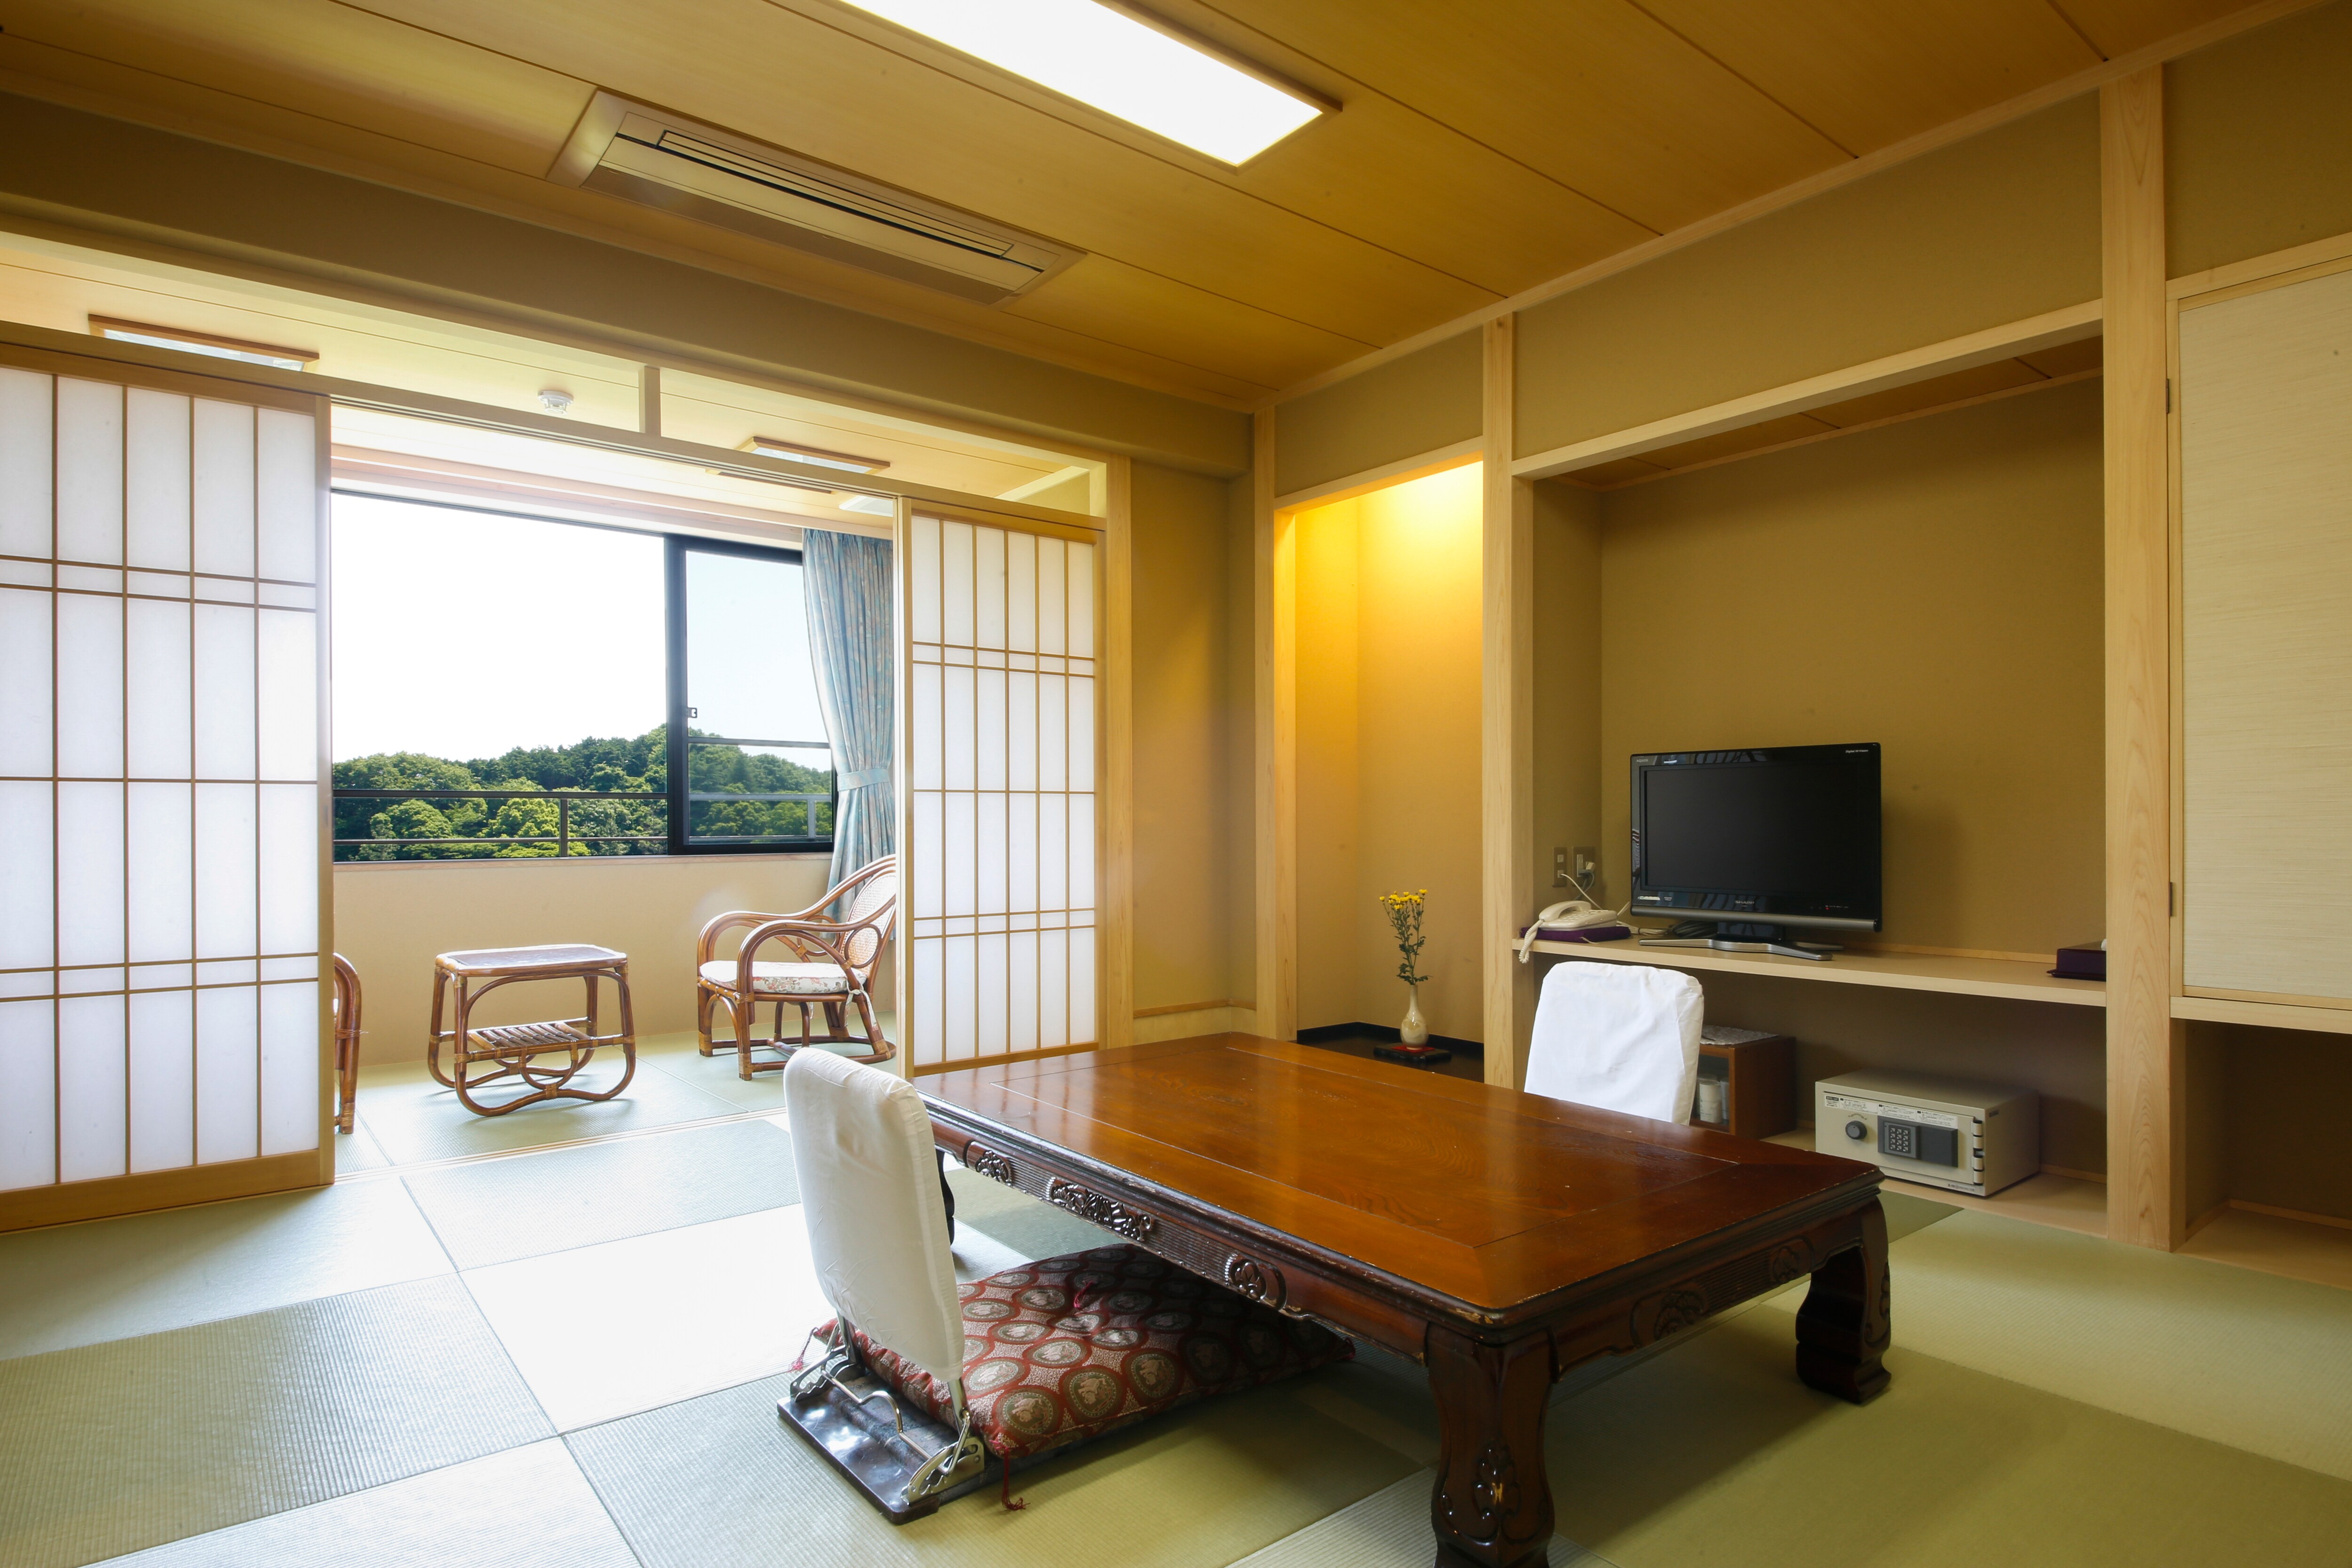 << West Building >> Japanese-style room 10 tatami mats, an example